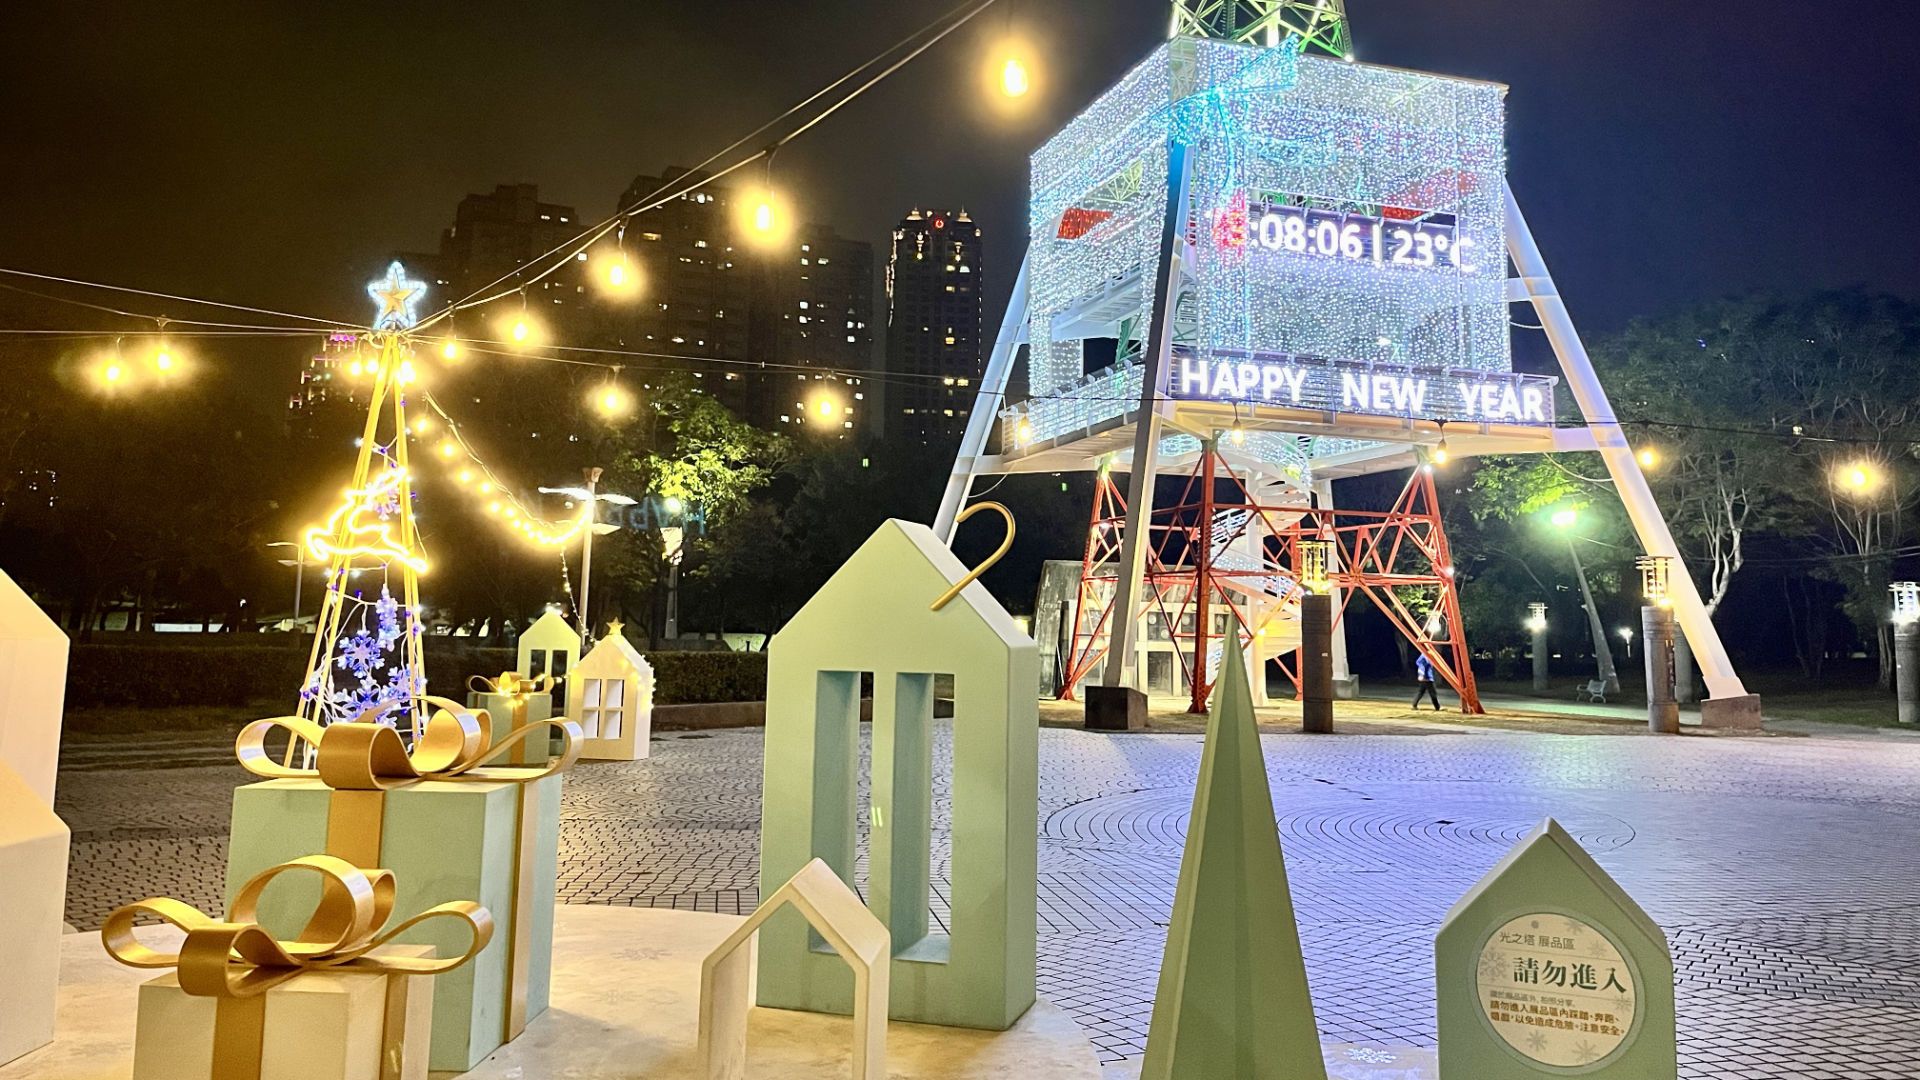 Sculptures of presents and decorations in the foreground, and the current time, temperature, and the words “Happy New Year” illuminated on the side of the pylon.